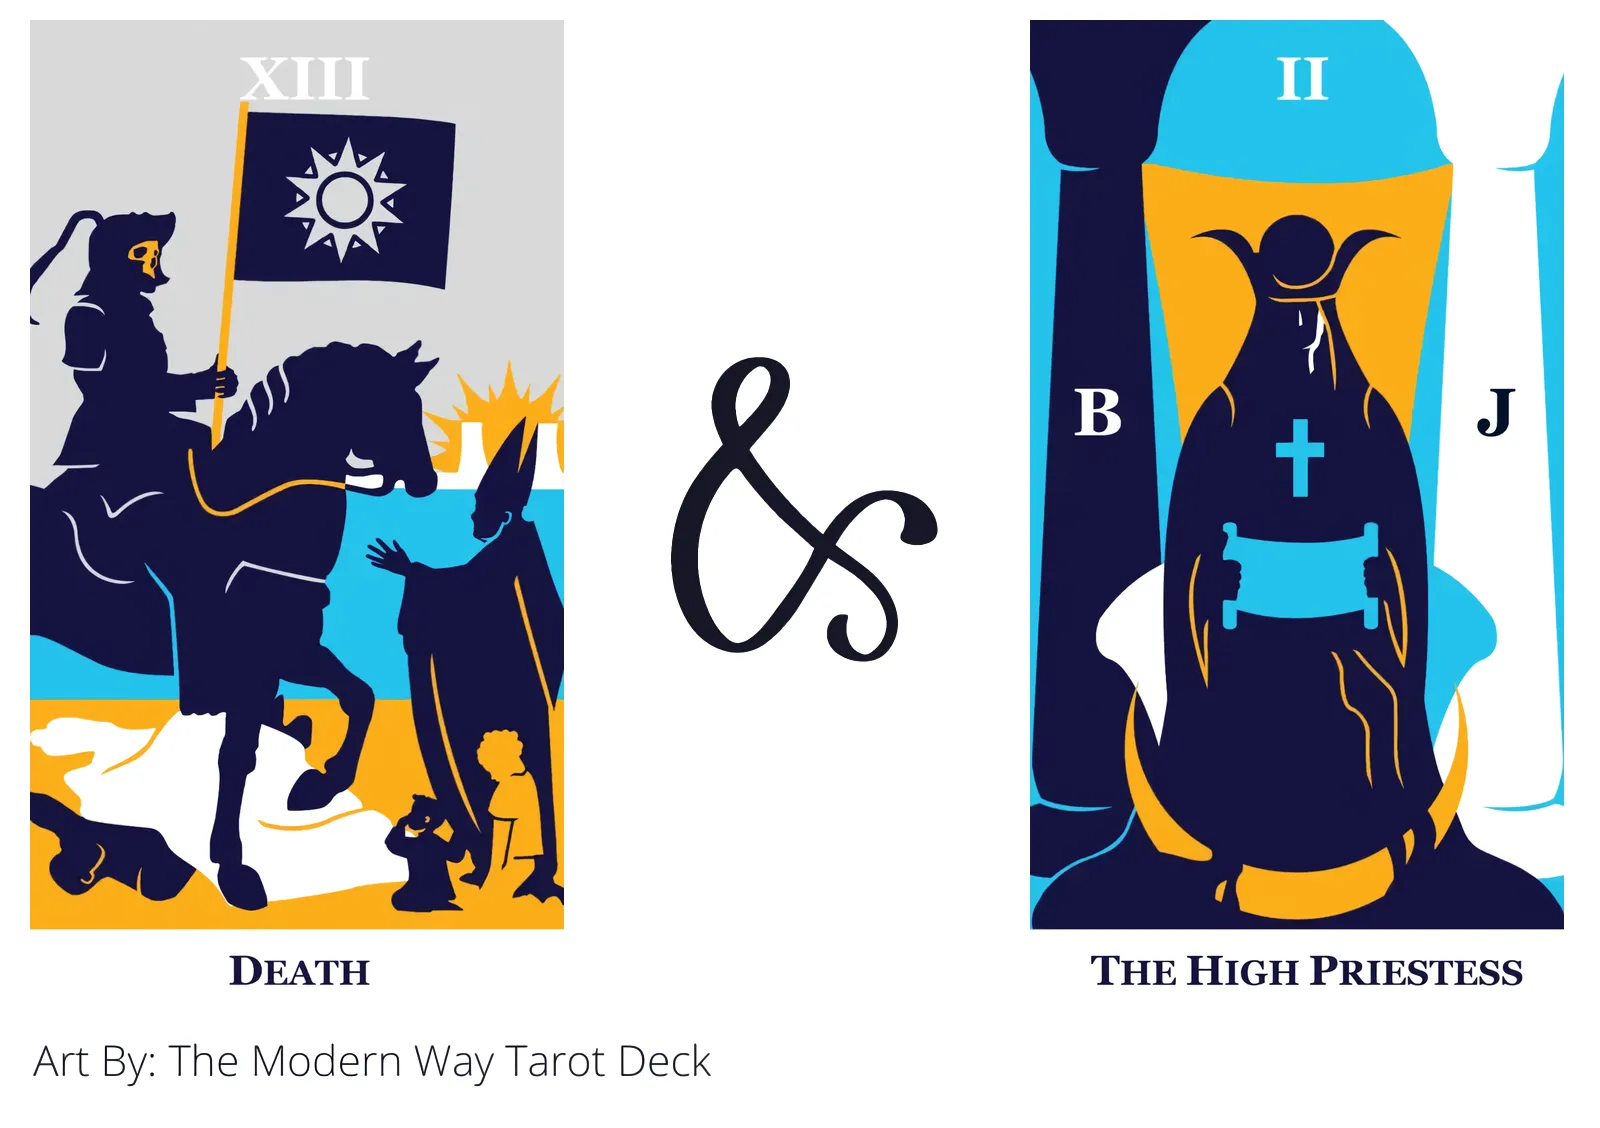 death and the high priestess tarot cards together